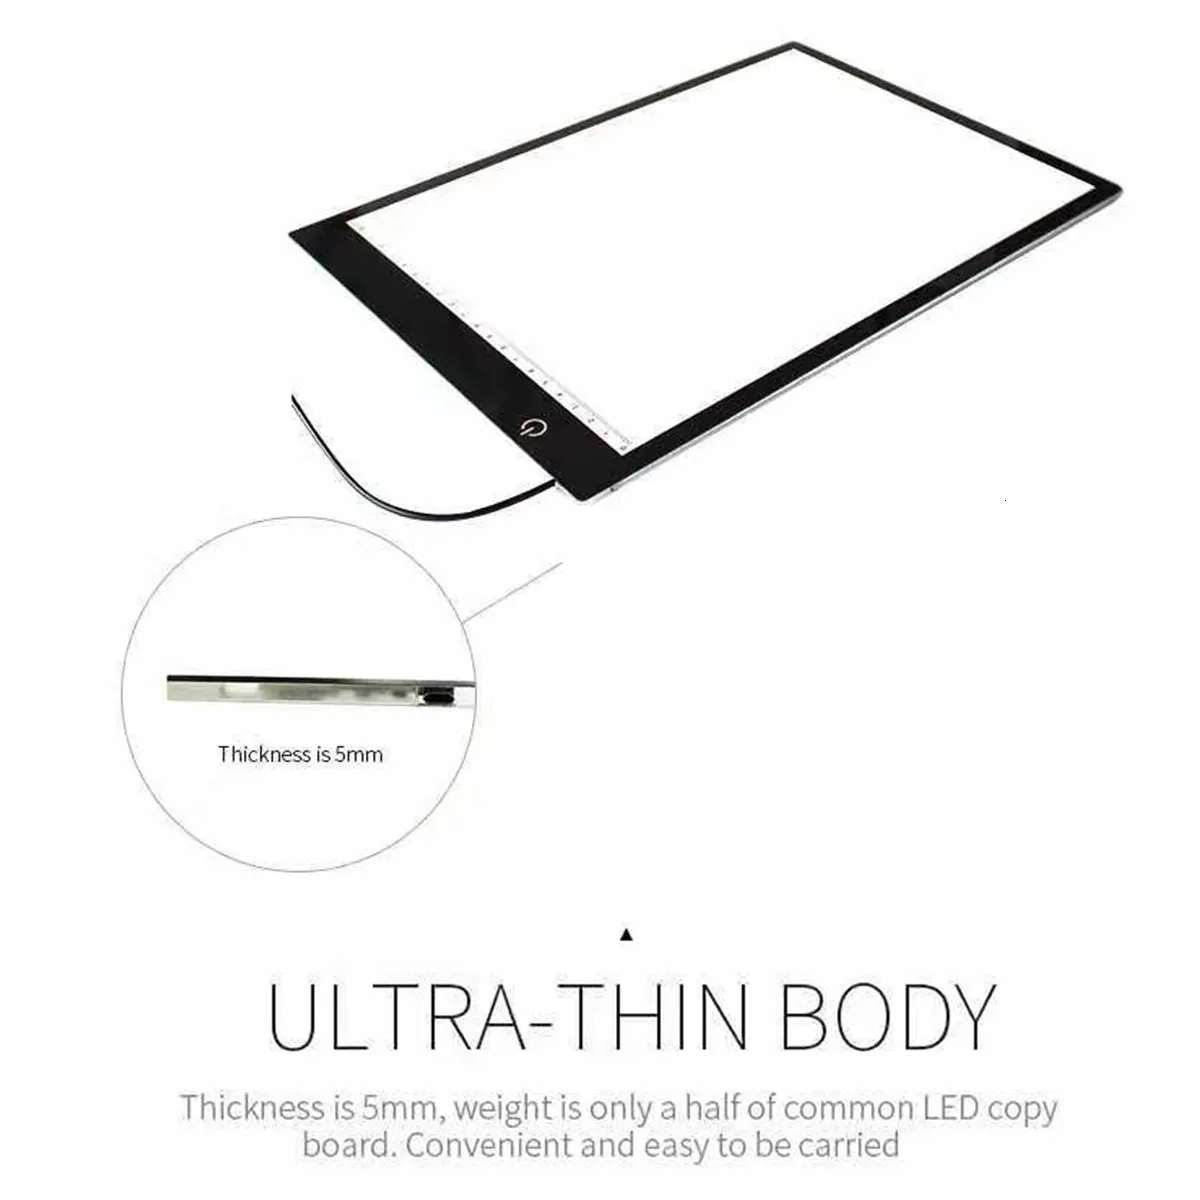 KaKBeir LED Drawing Art Stencil Board With Light Box And Tracing Table Pad  A3, A4, And A5 Best Artificial Intelligence Toys For Electronics Writing  230608 From Bian07, $18.99